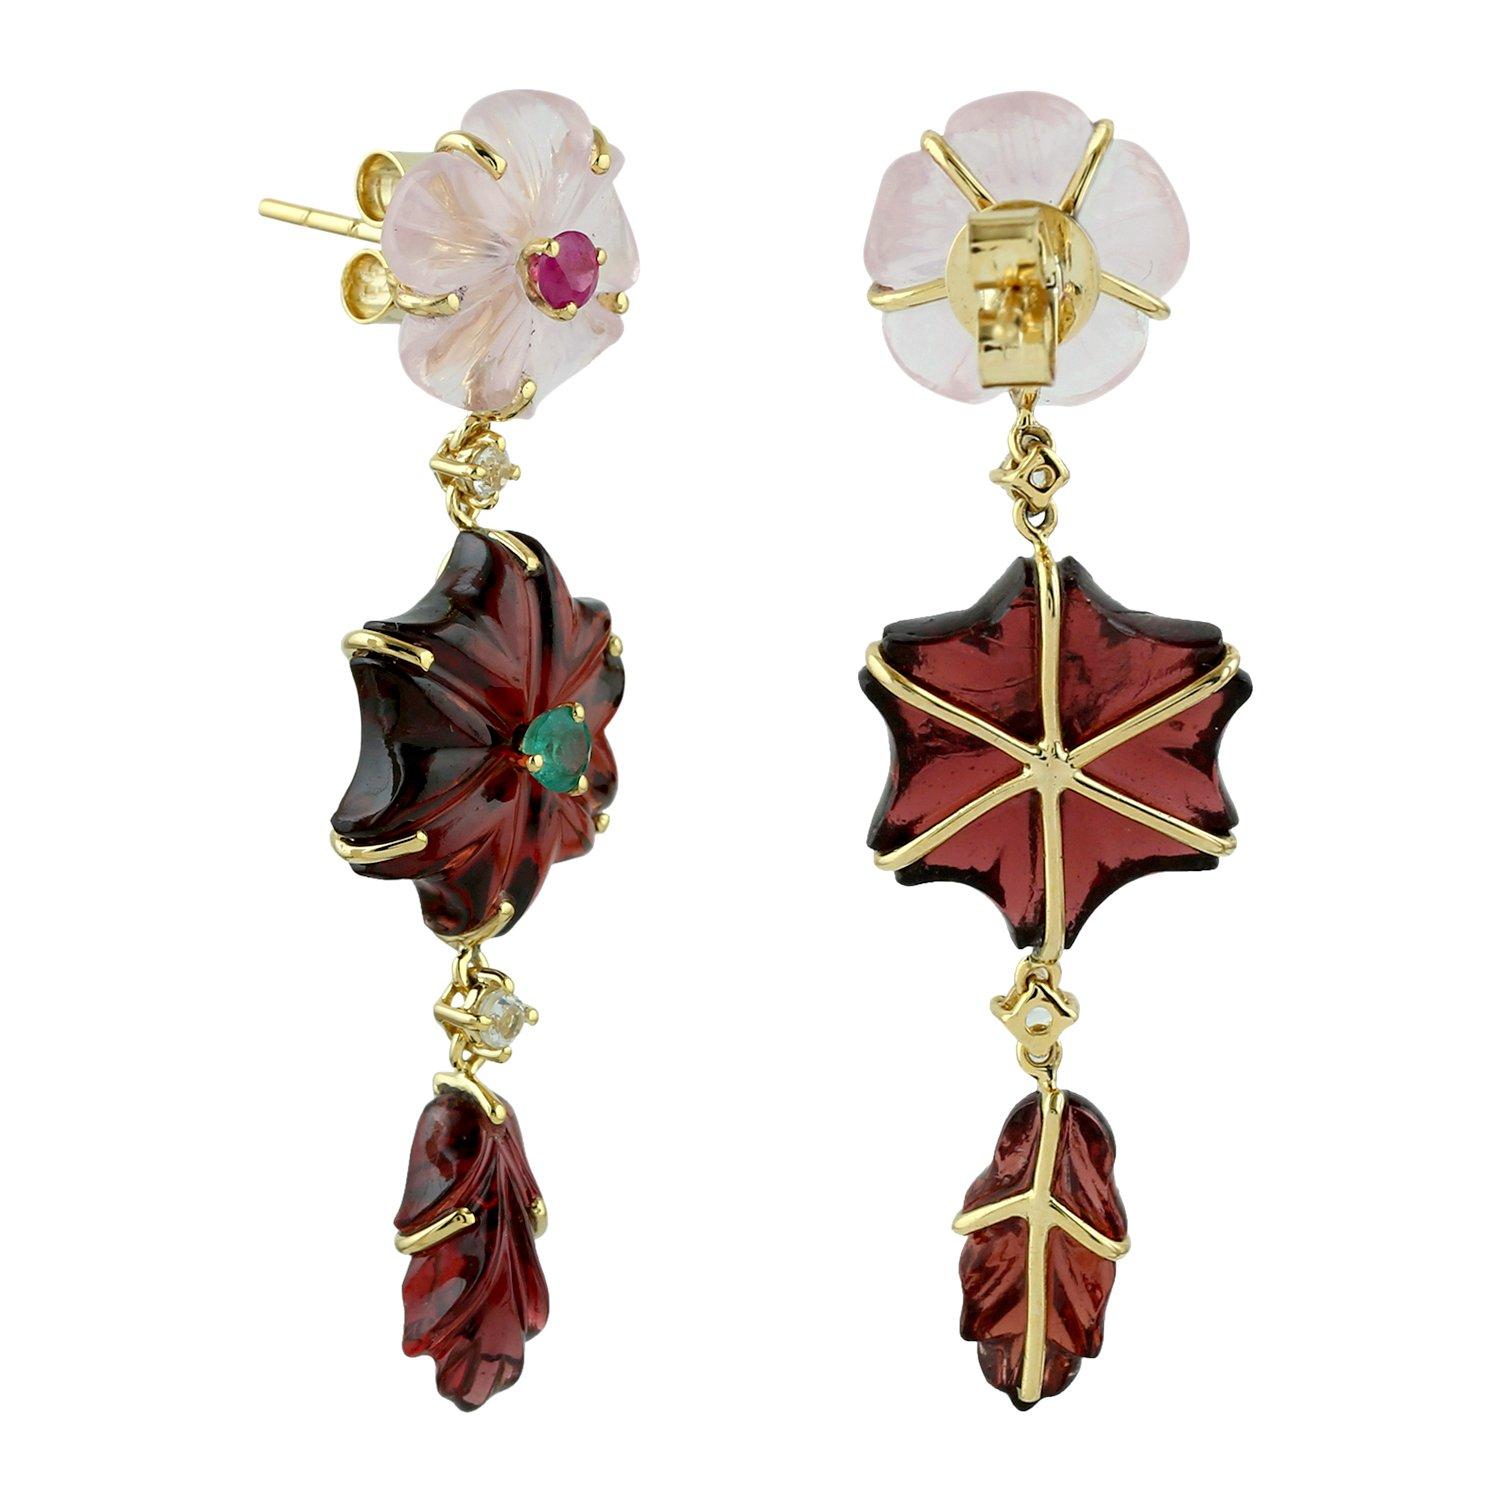 Cast in 18-karat gold. These beautiful earrings are set with 23.21 carats hand carved garnet, quartz, ruby, topaz and emerald.  See other flower collection matching pieces.

FOLLOW  MEGHNA JEWELS storefront to view the latest collection & exclusive